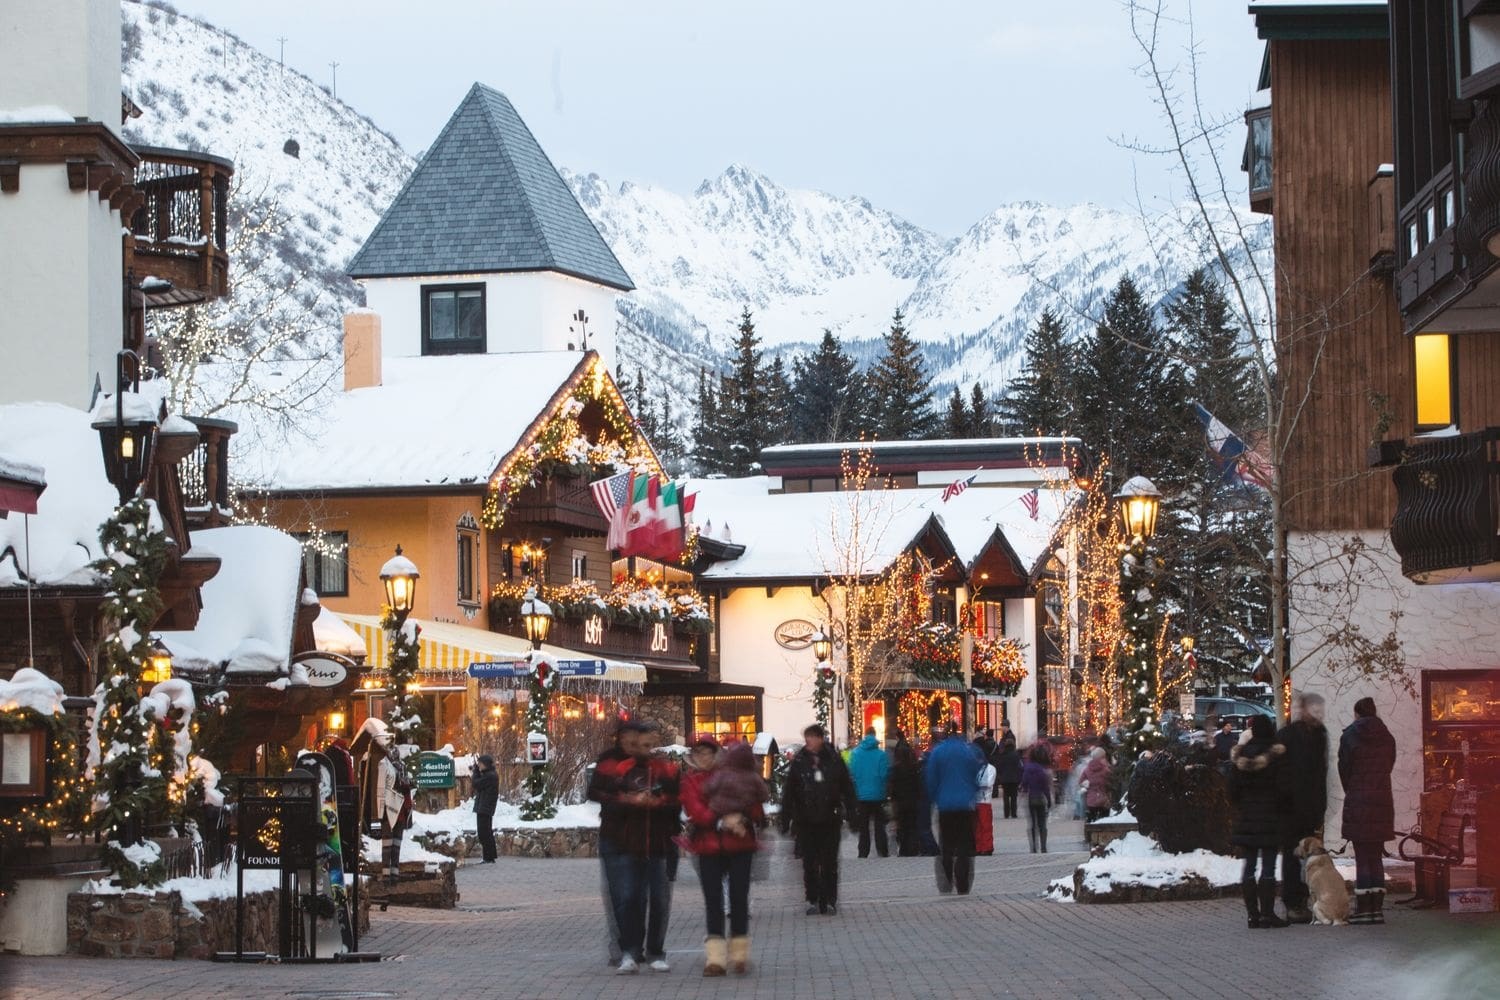 Vail Style…What to Wear and Where to Shop, Shopping in Vail Village, Vail shopping, Vail Village